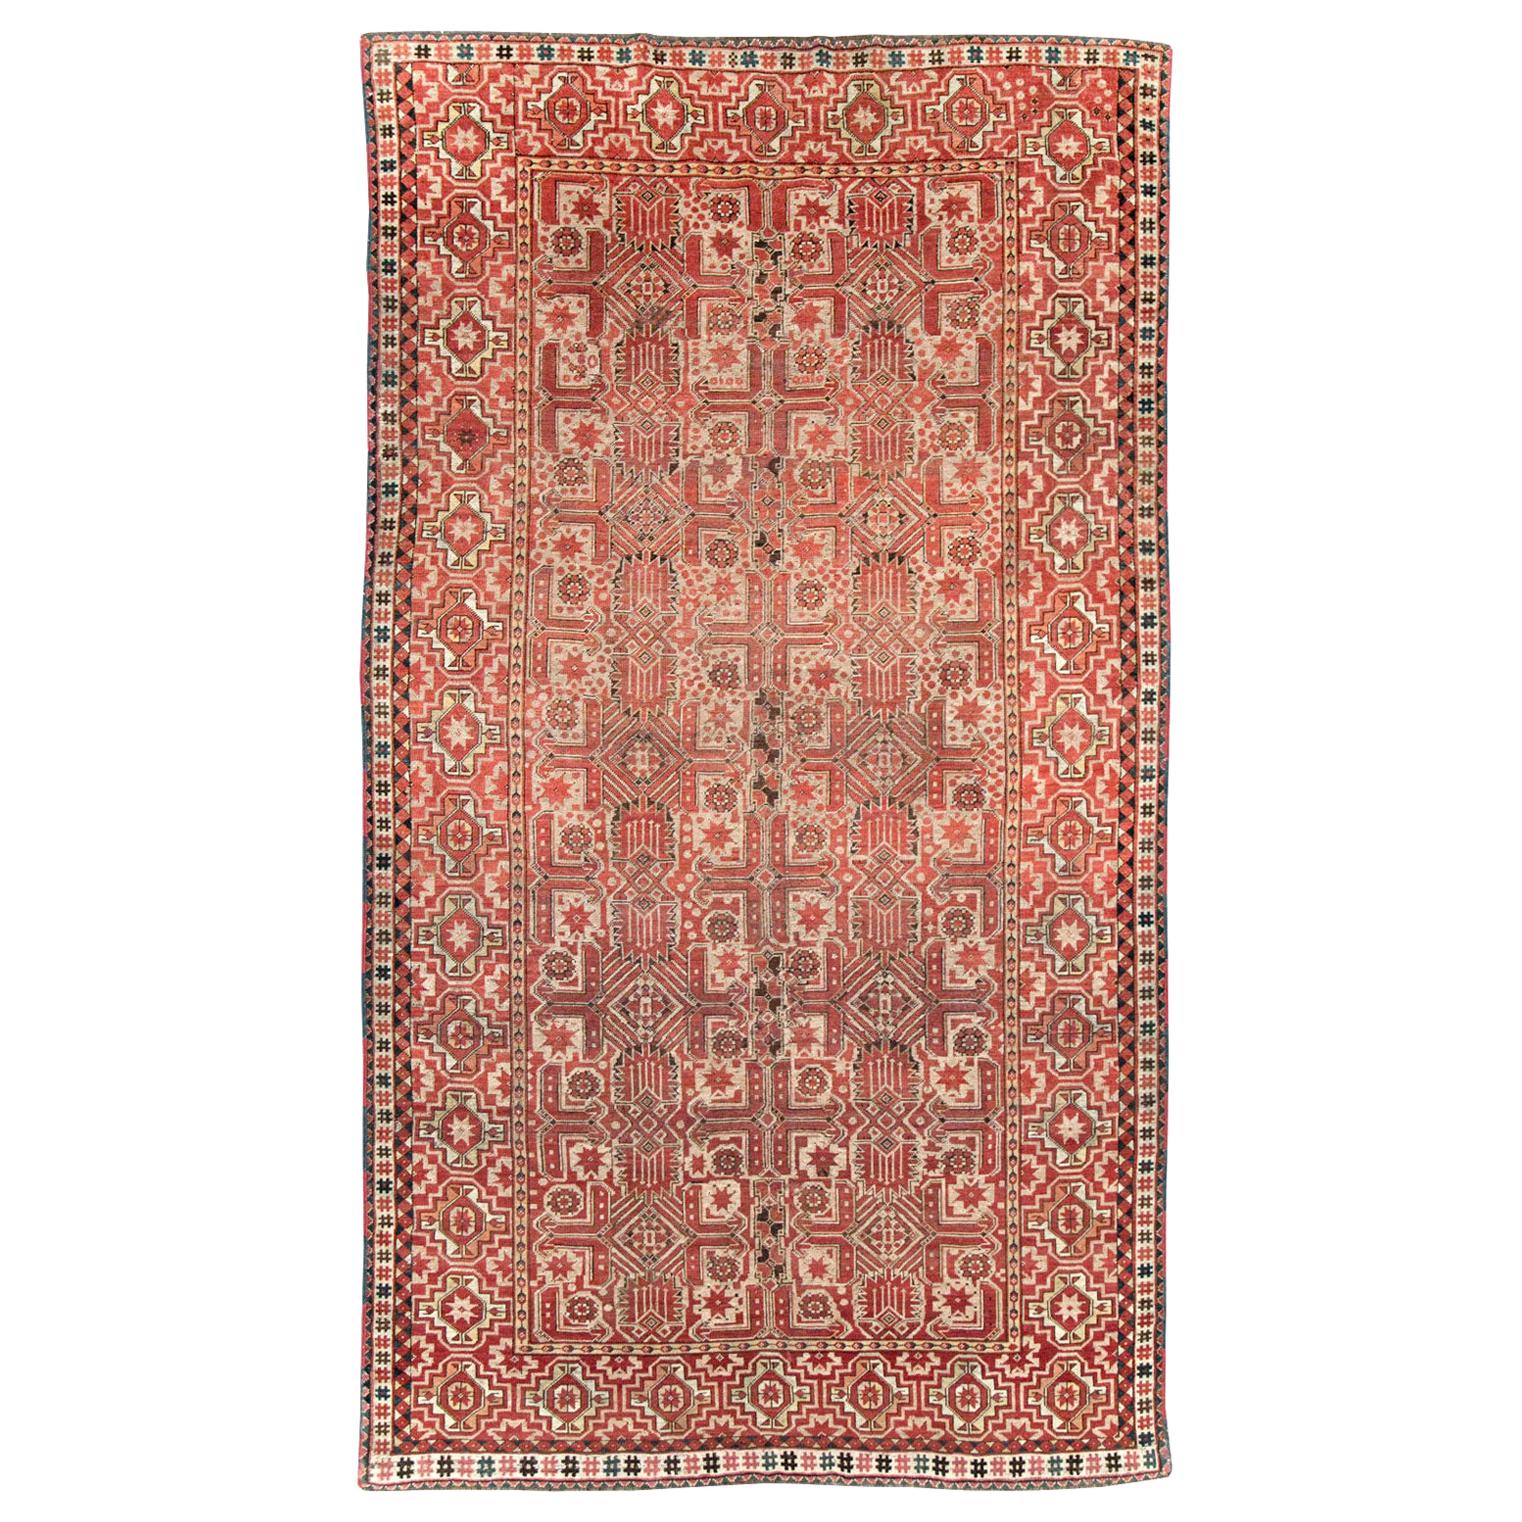 Early 20th Century Handmade Central Asian Tribal Gallery Accent Rug